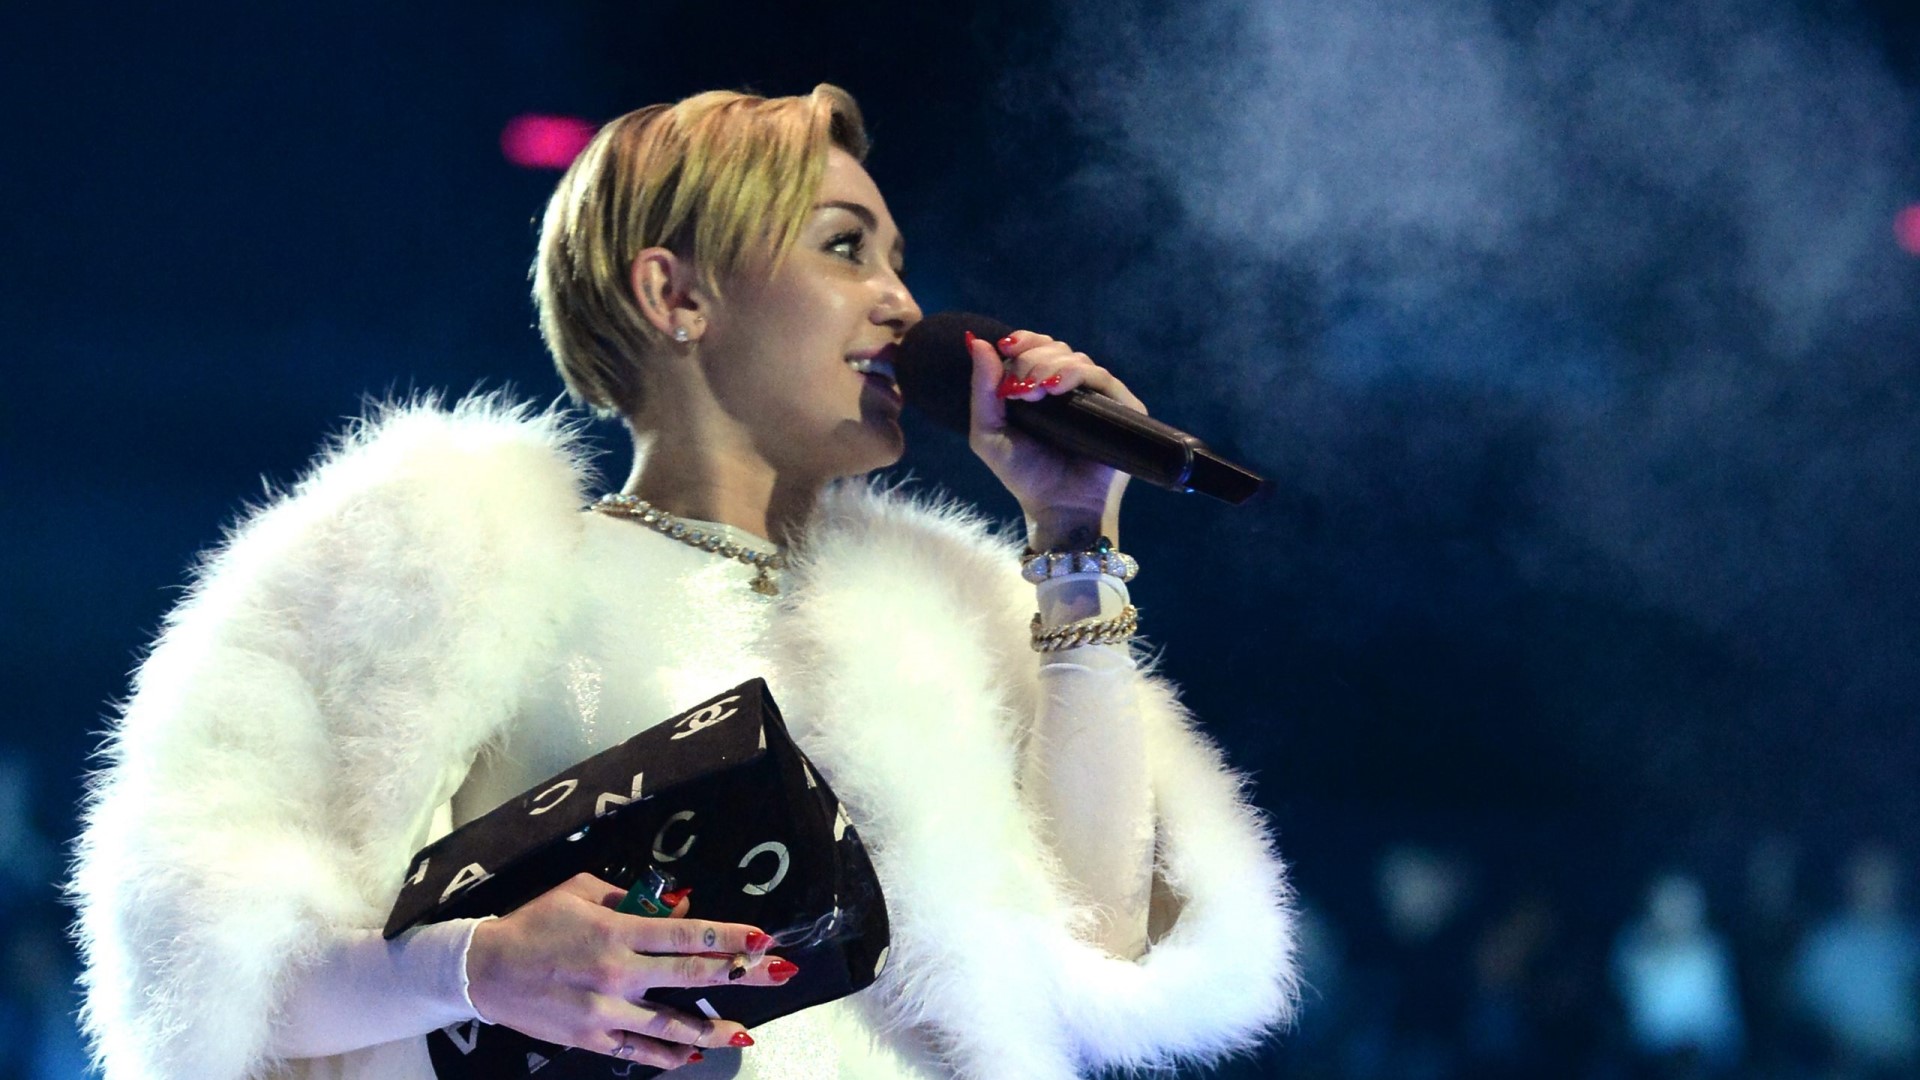 The success of 'Wrecking Ball'